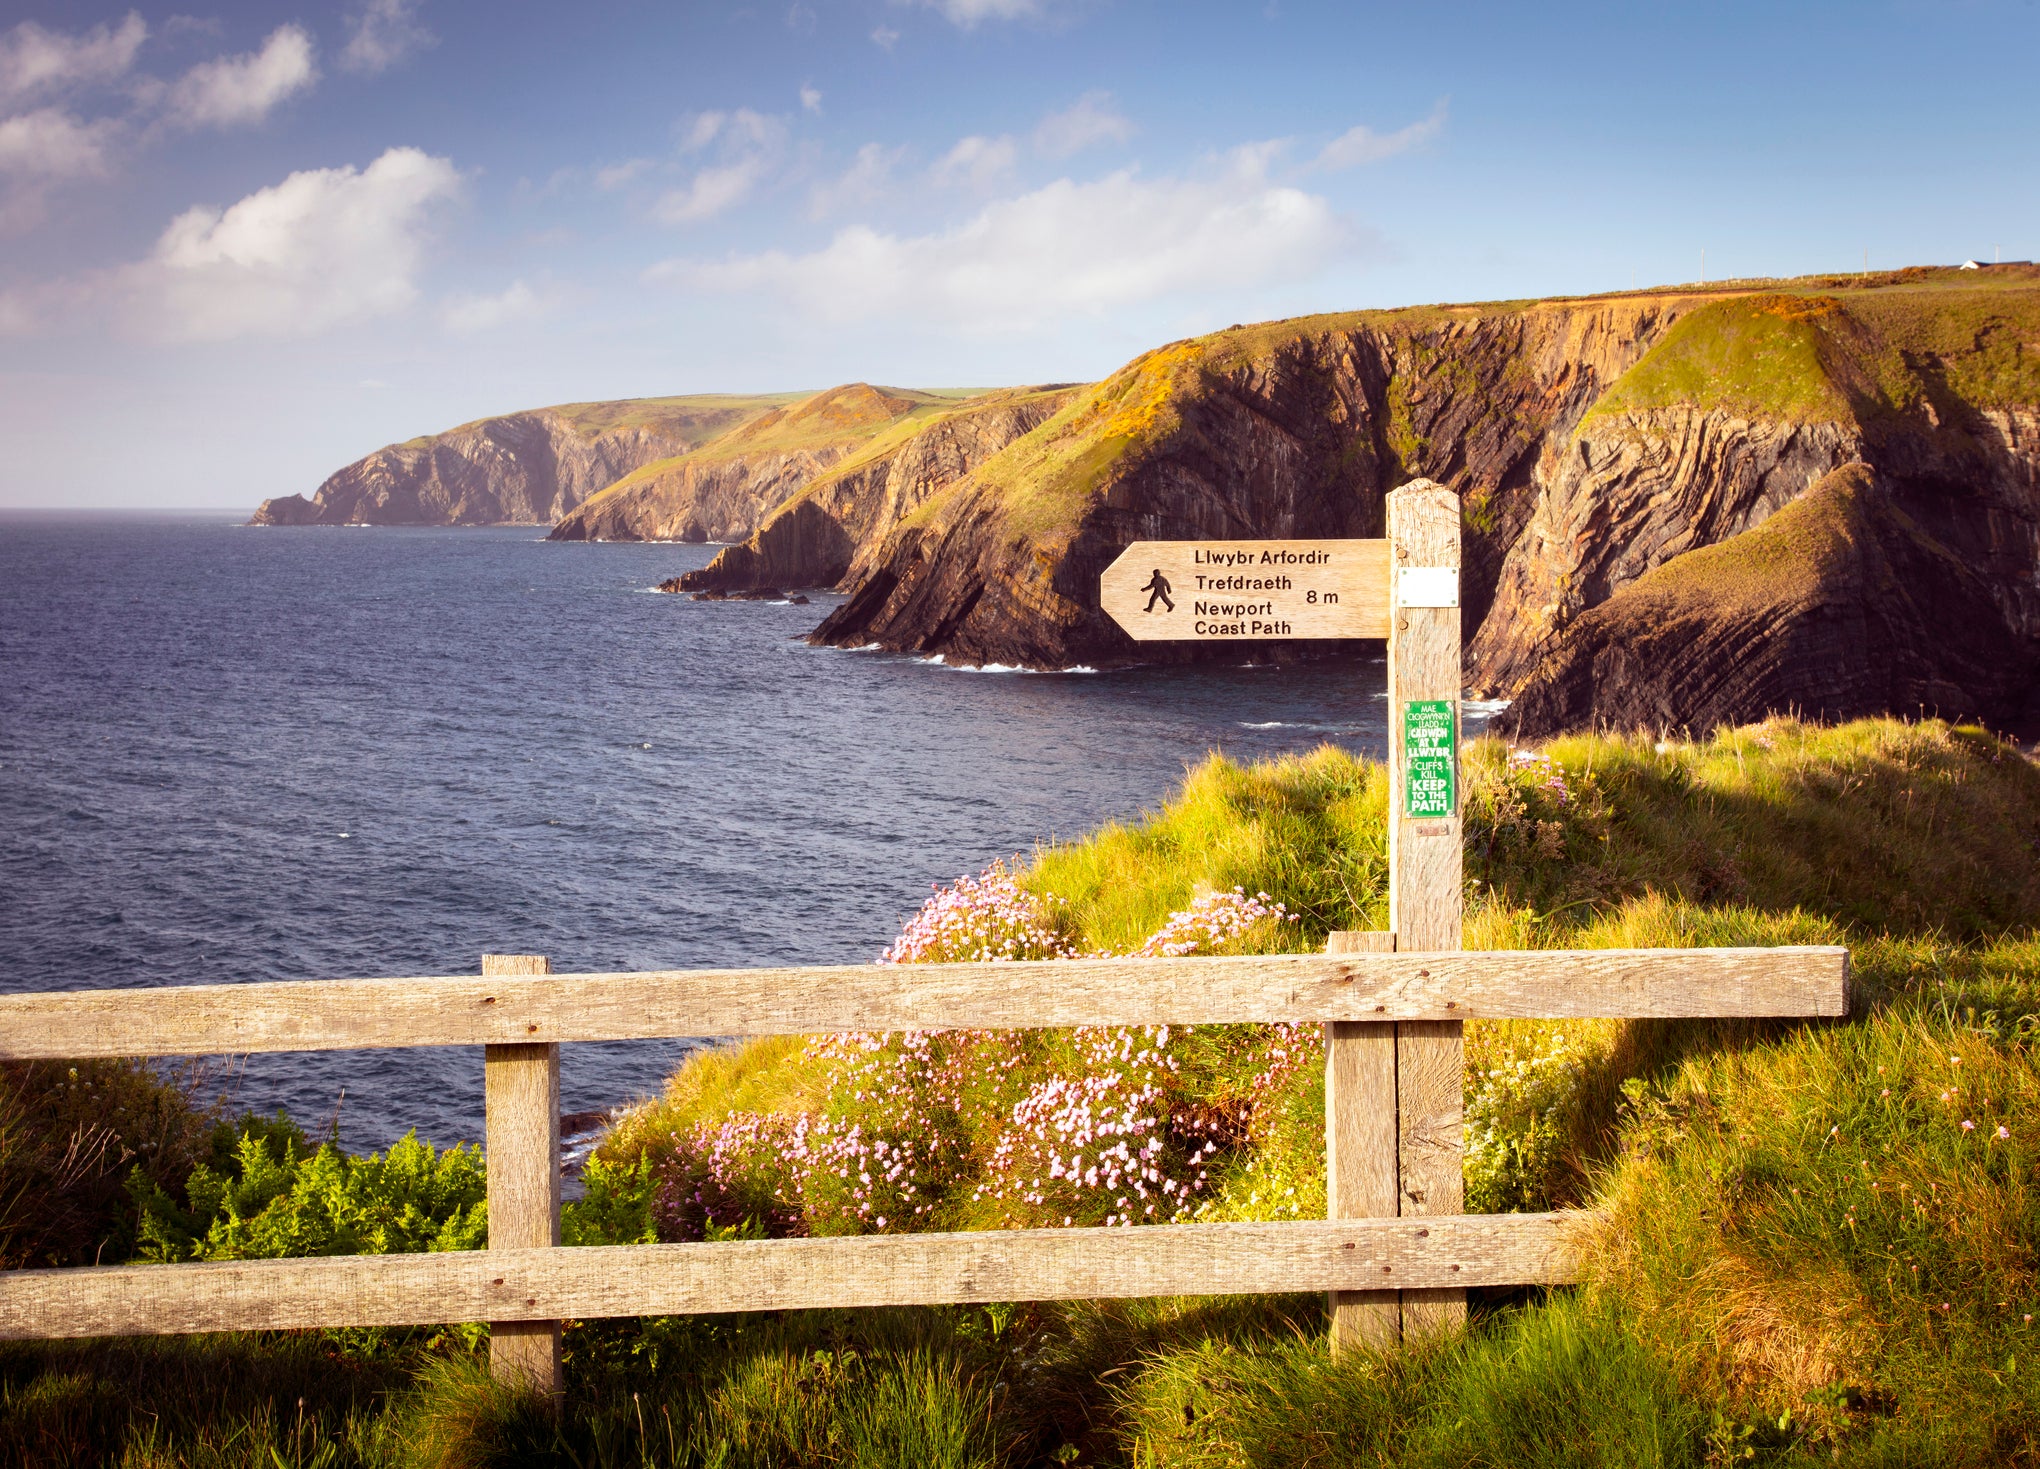 The dramatic coastline of the Pembrokeshire Coast Path stretches 186 miles from St Dogmaels to Amroth